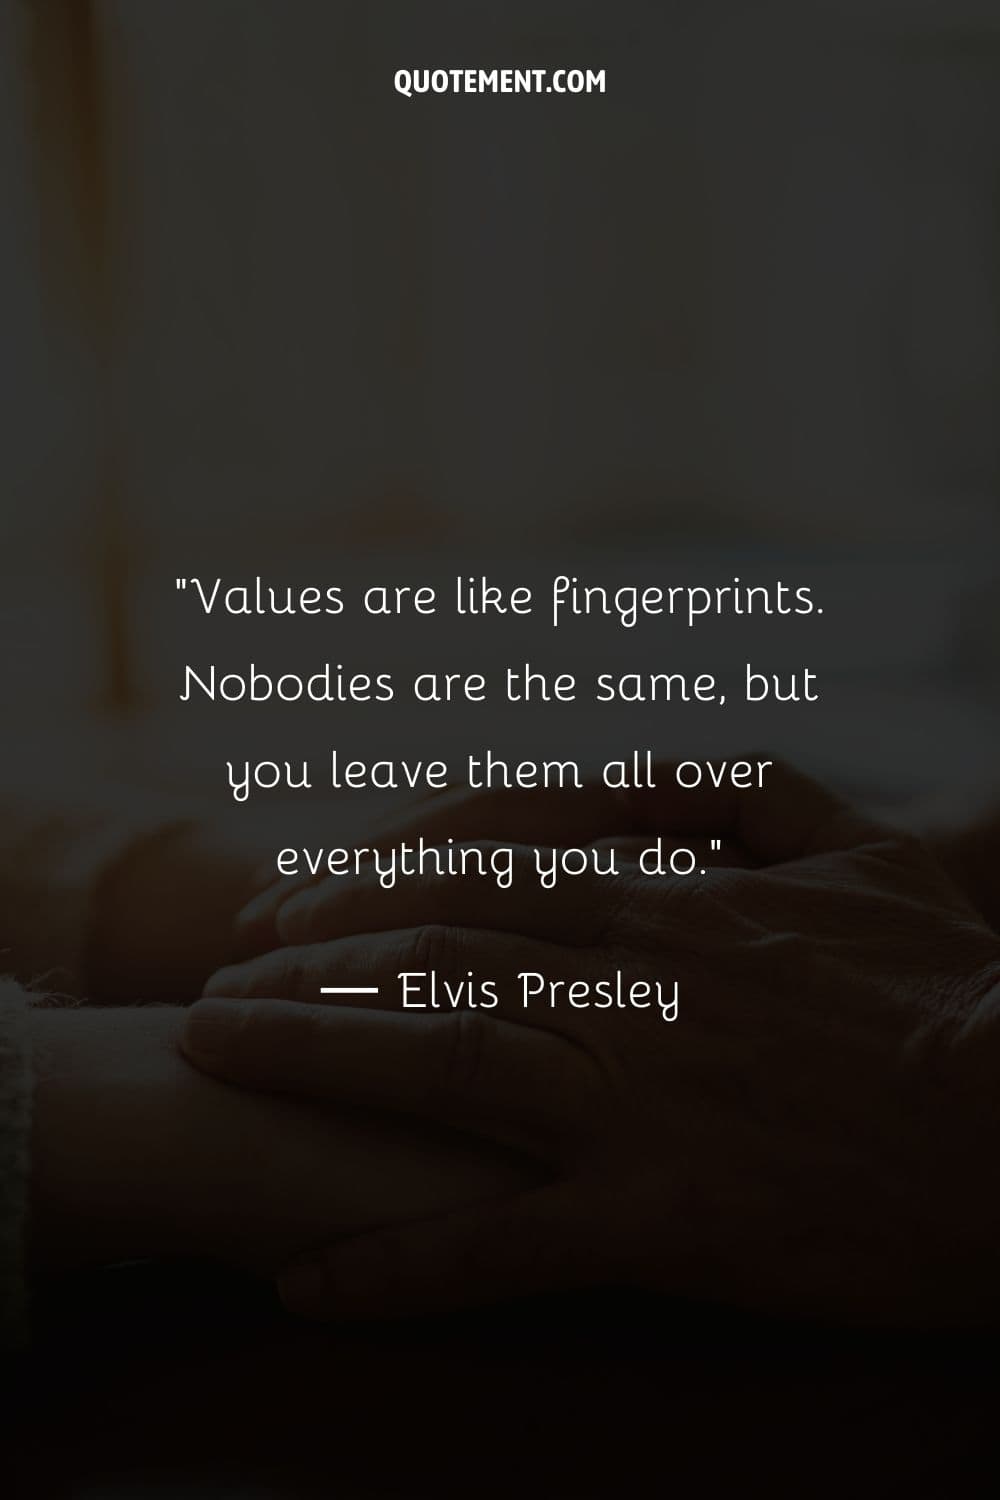 Values are like fingerprints. Nobodies are the same, but you leave them all over everything you do